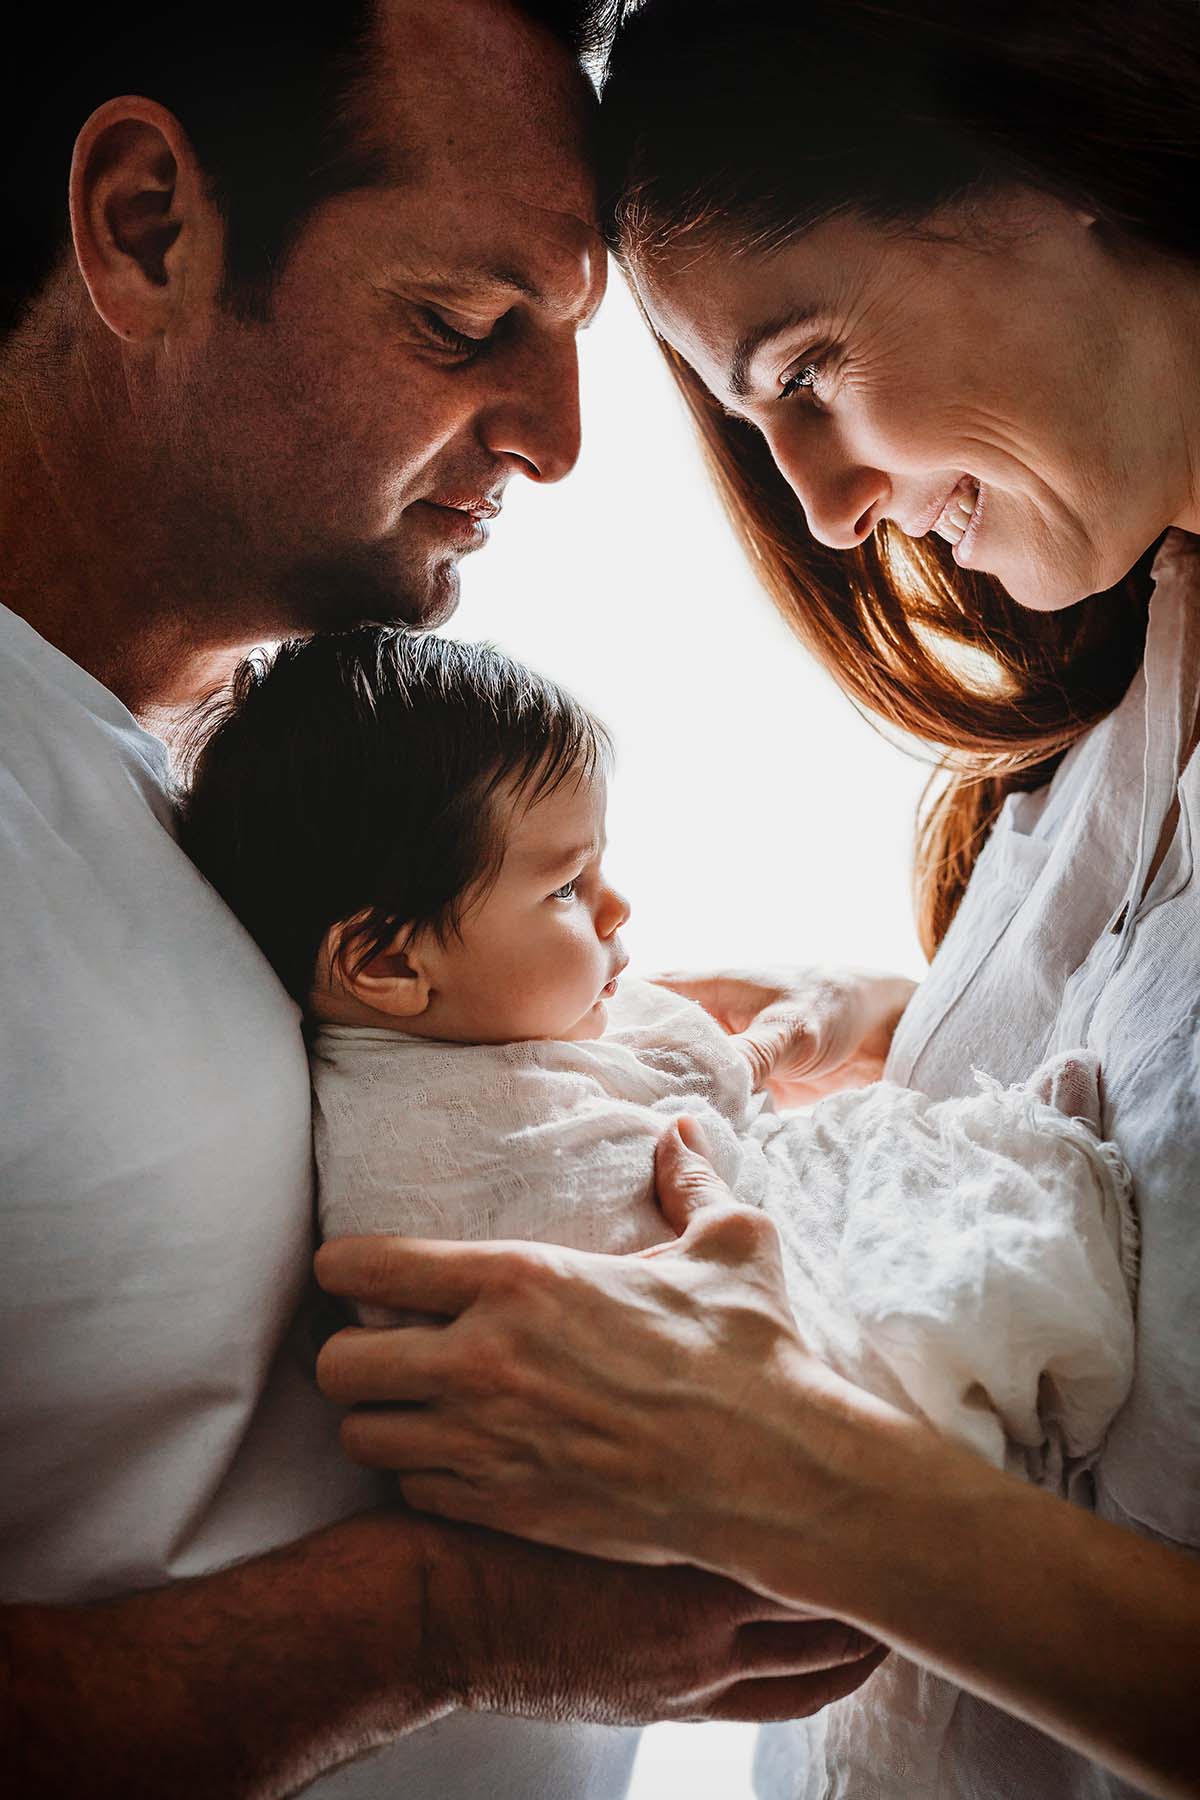 Parents face each other while holding their newborn between them in front of a window